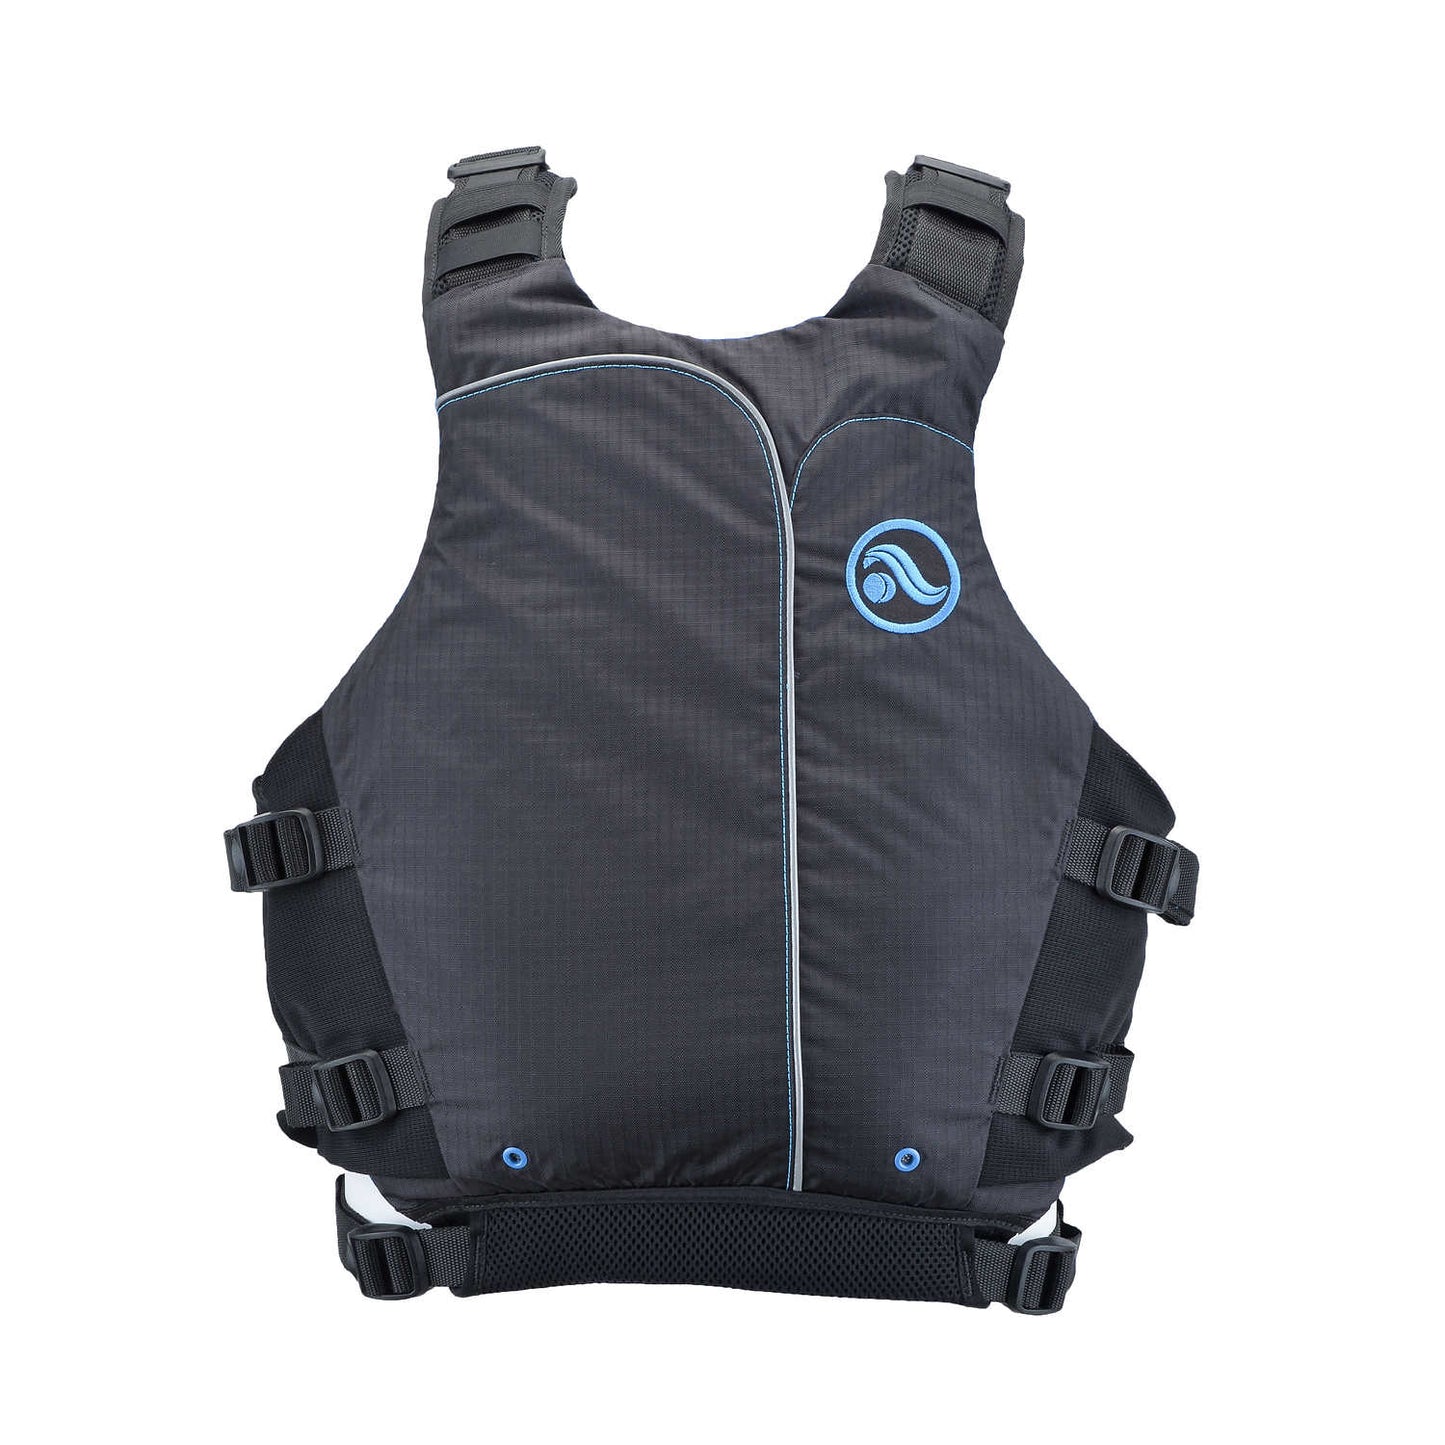 Astral Norge PFD